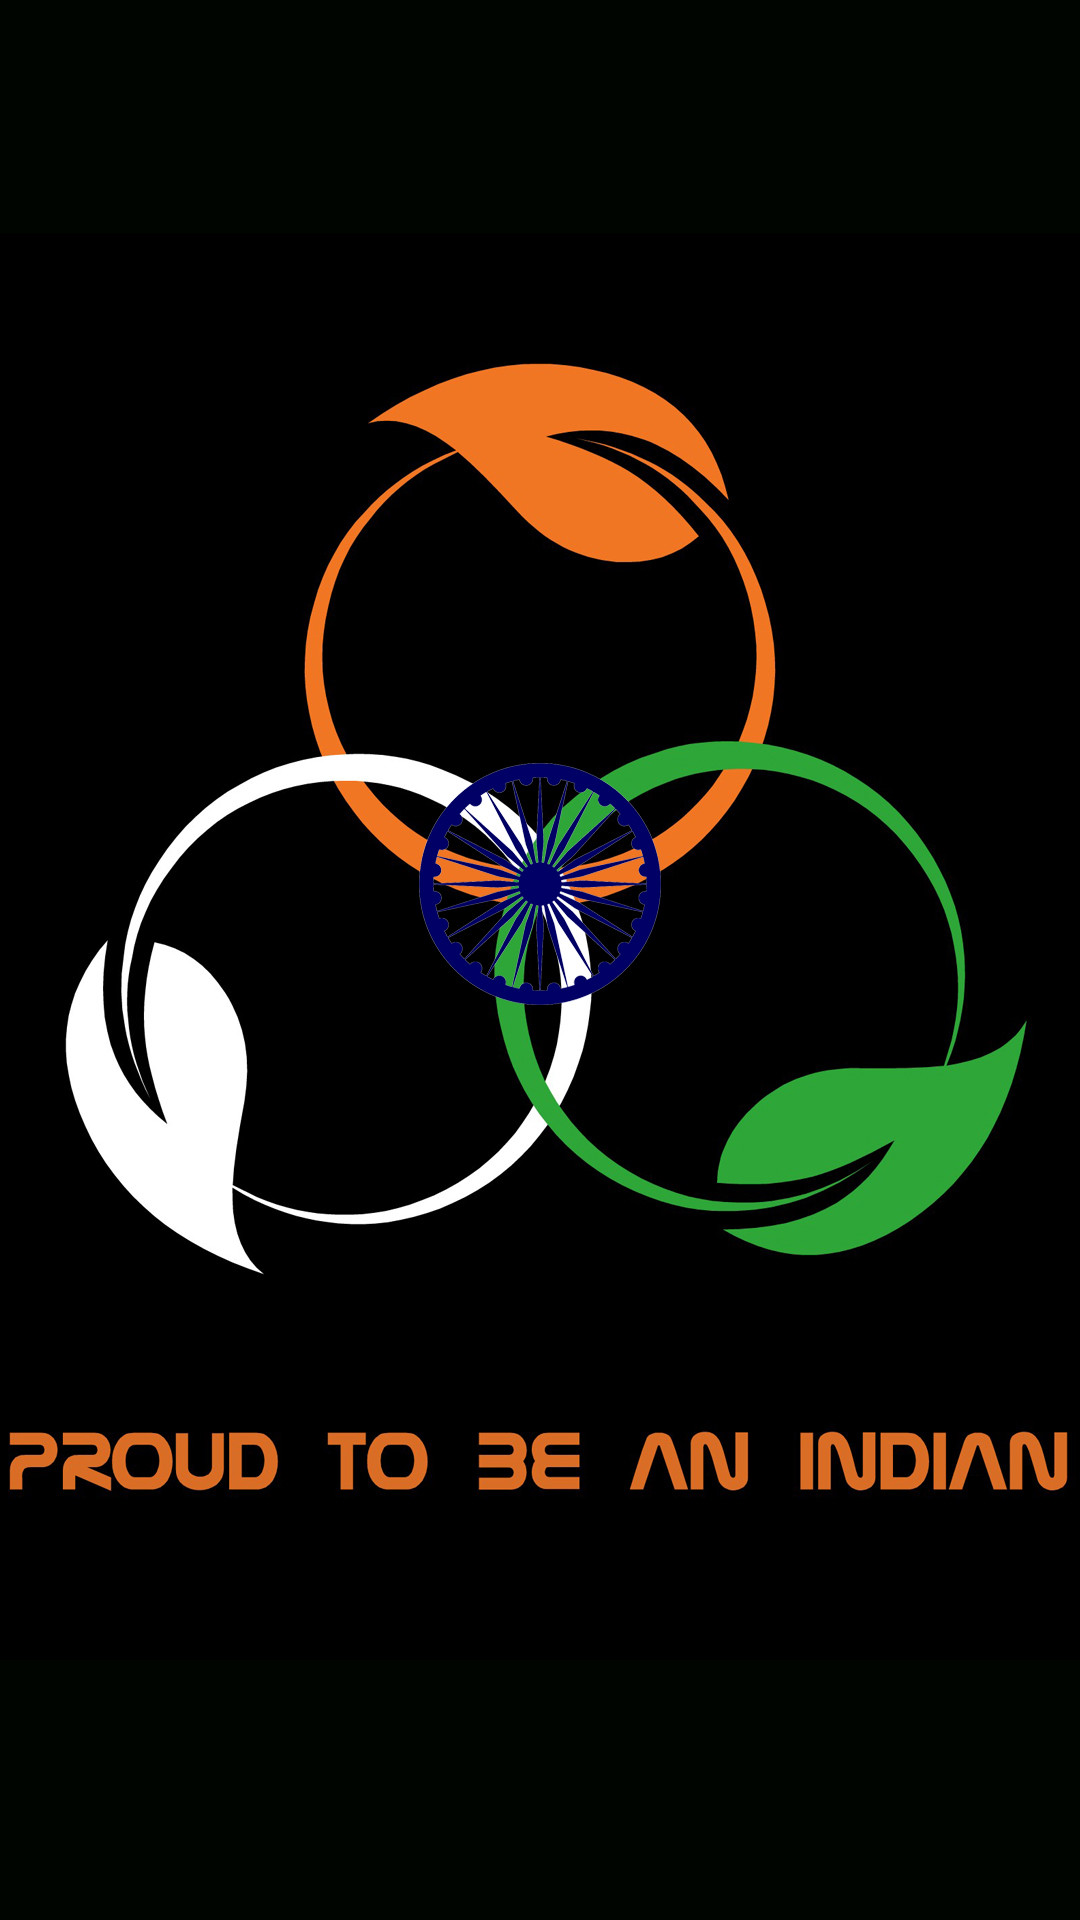 1080x1920 ... File to download for India Flag for Mobile Phone Wallpaper 10 of 17 -  Proud to